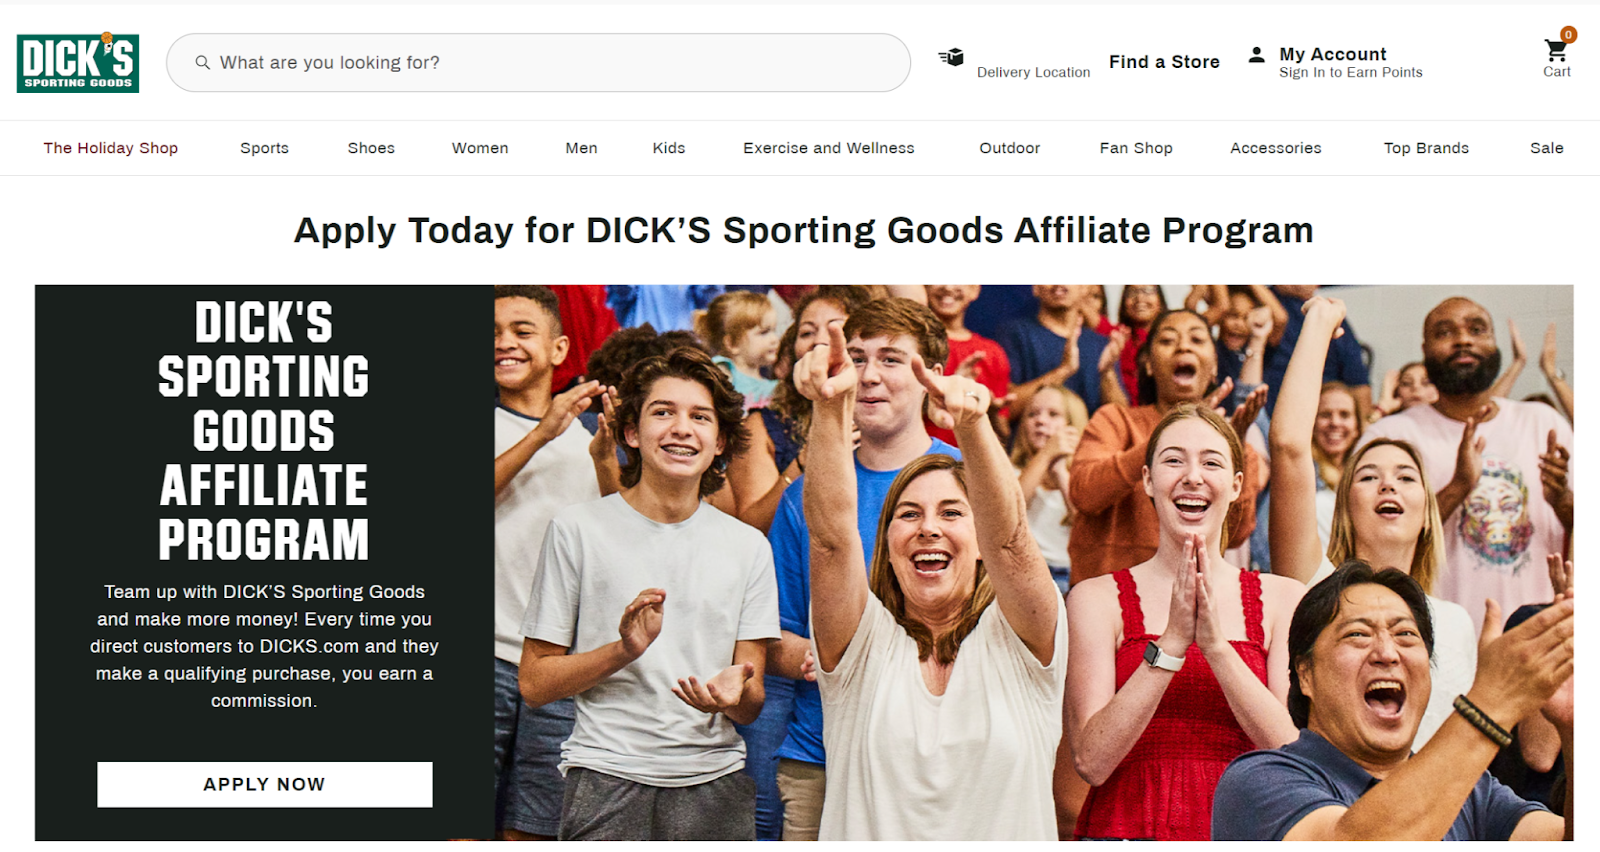 dick's sporting goods affiliate program home page